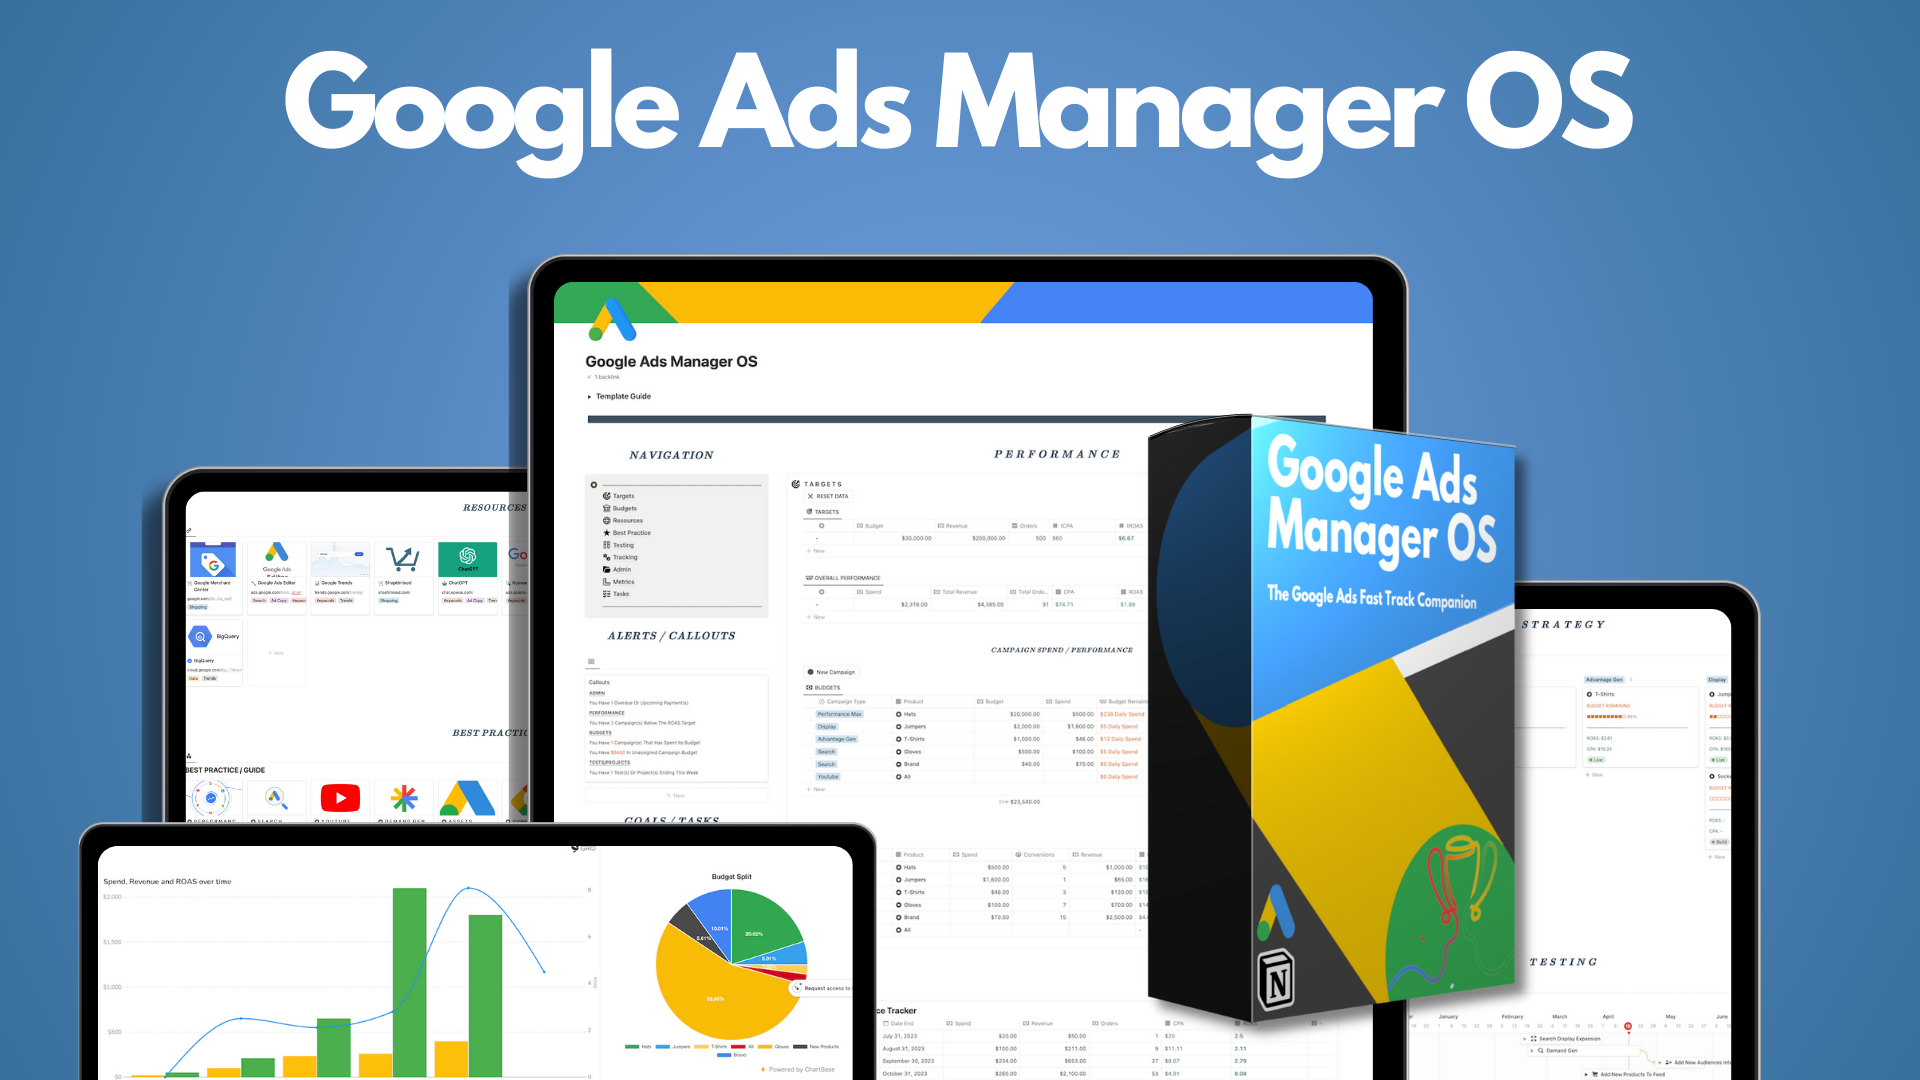 A dashboard and guide to start or grow your Google Ads account.